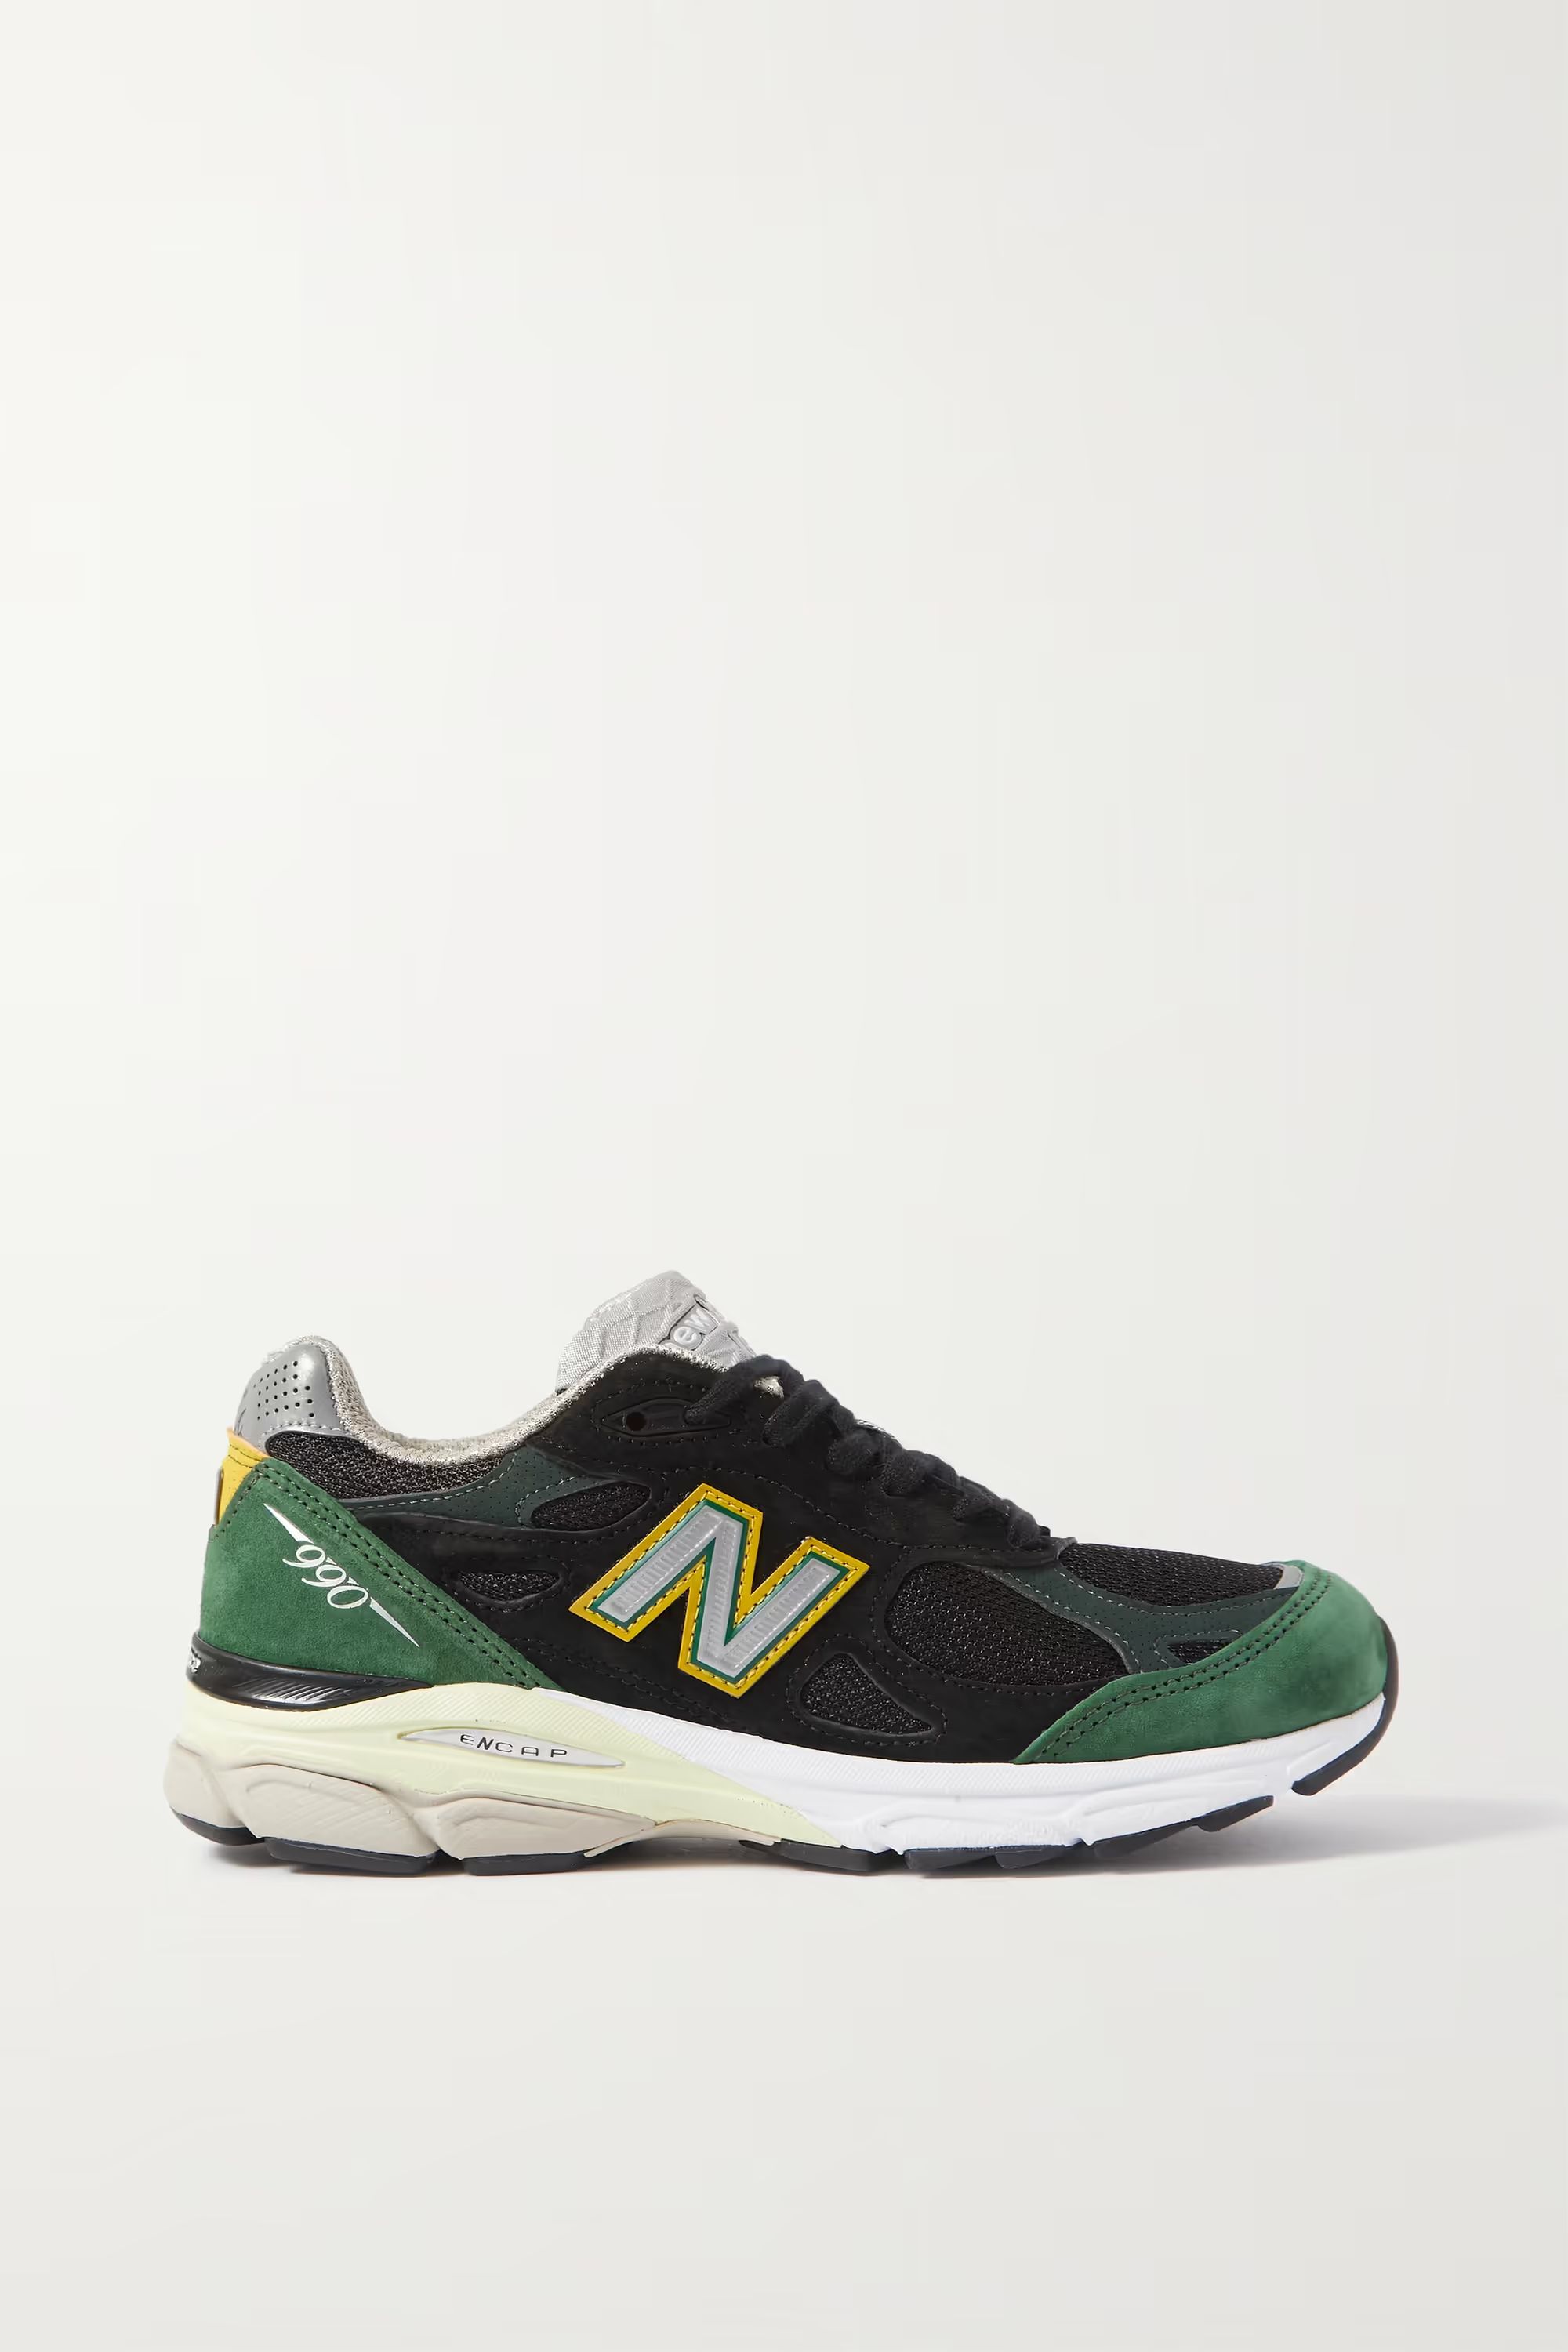 NEW BALANCE990v3 leather-trimmed suede and mesh sneakers | NET-A-PORTER (UK & EU)